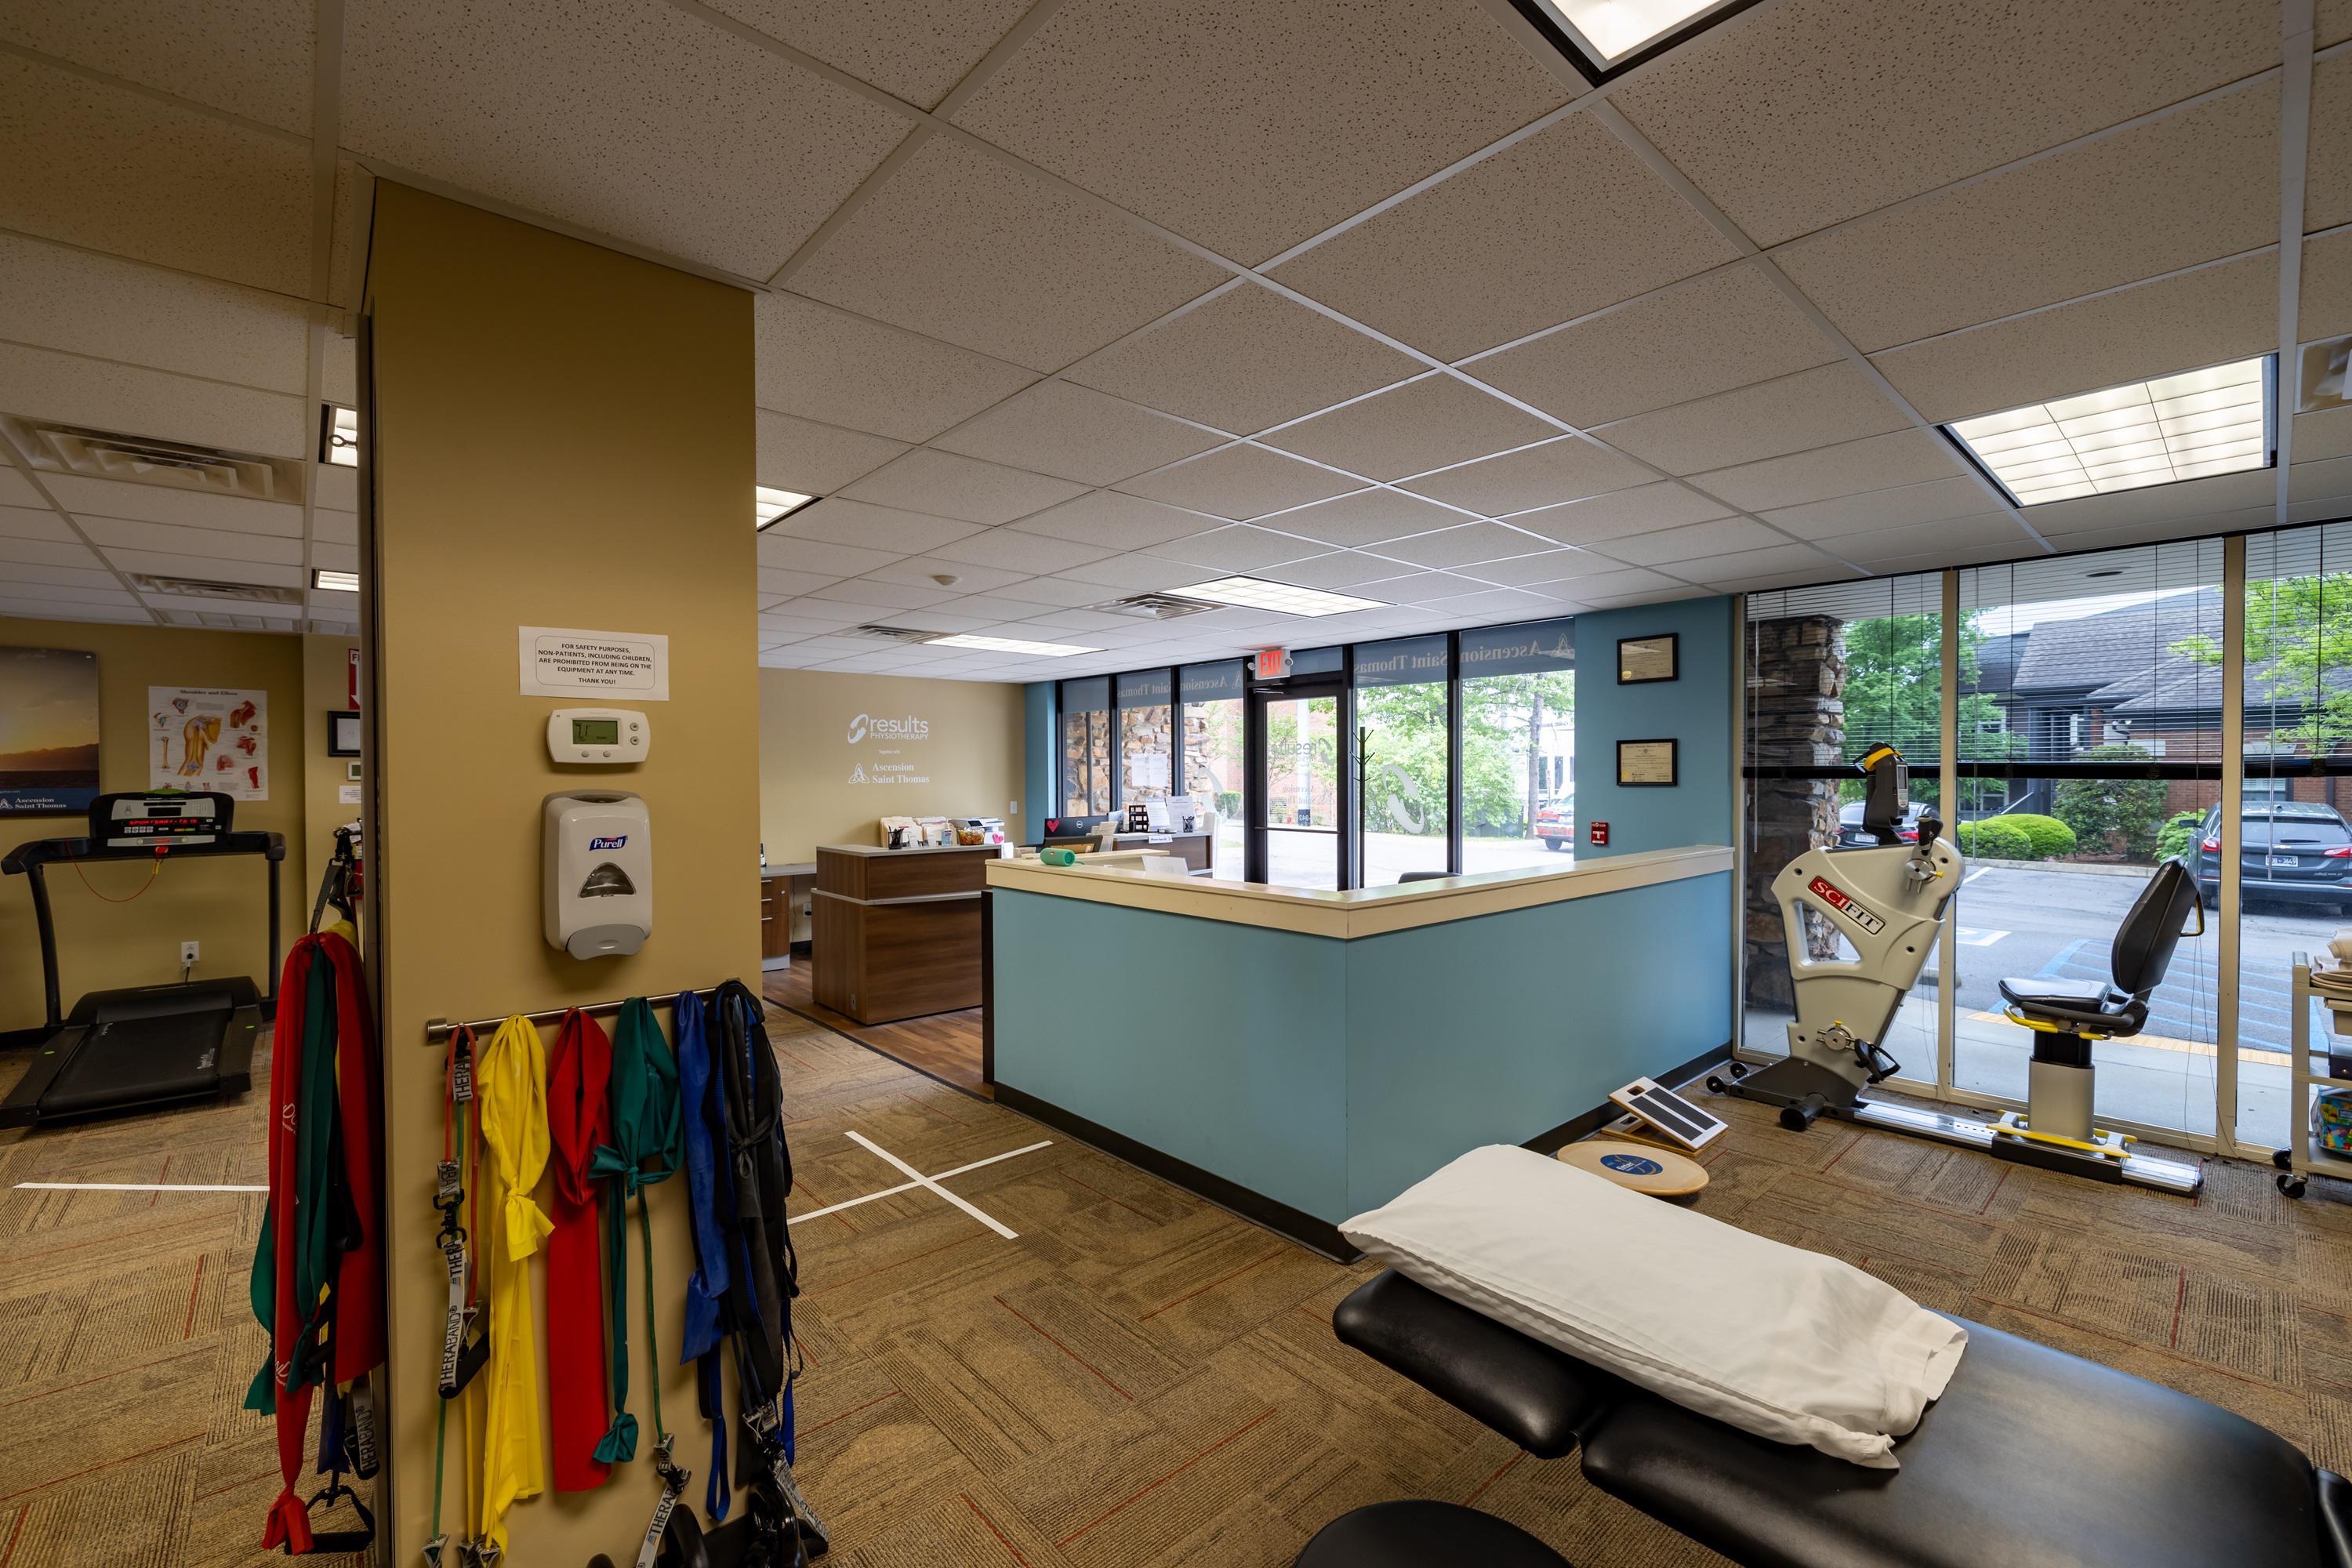 Results Physiotherapy Nashville, Tennessee - Green Hills North Nashville (615)942-9050